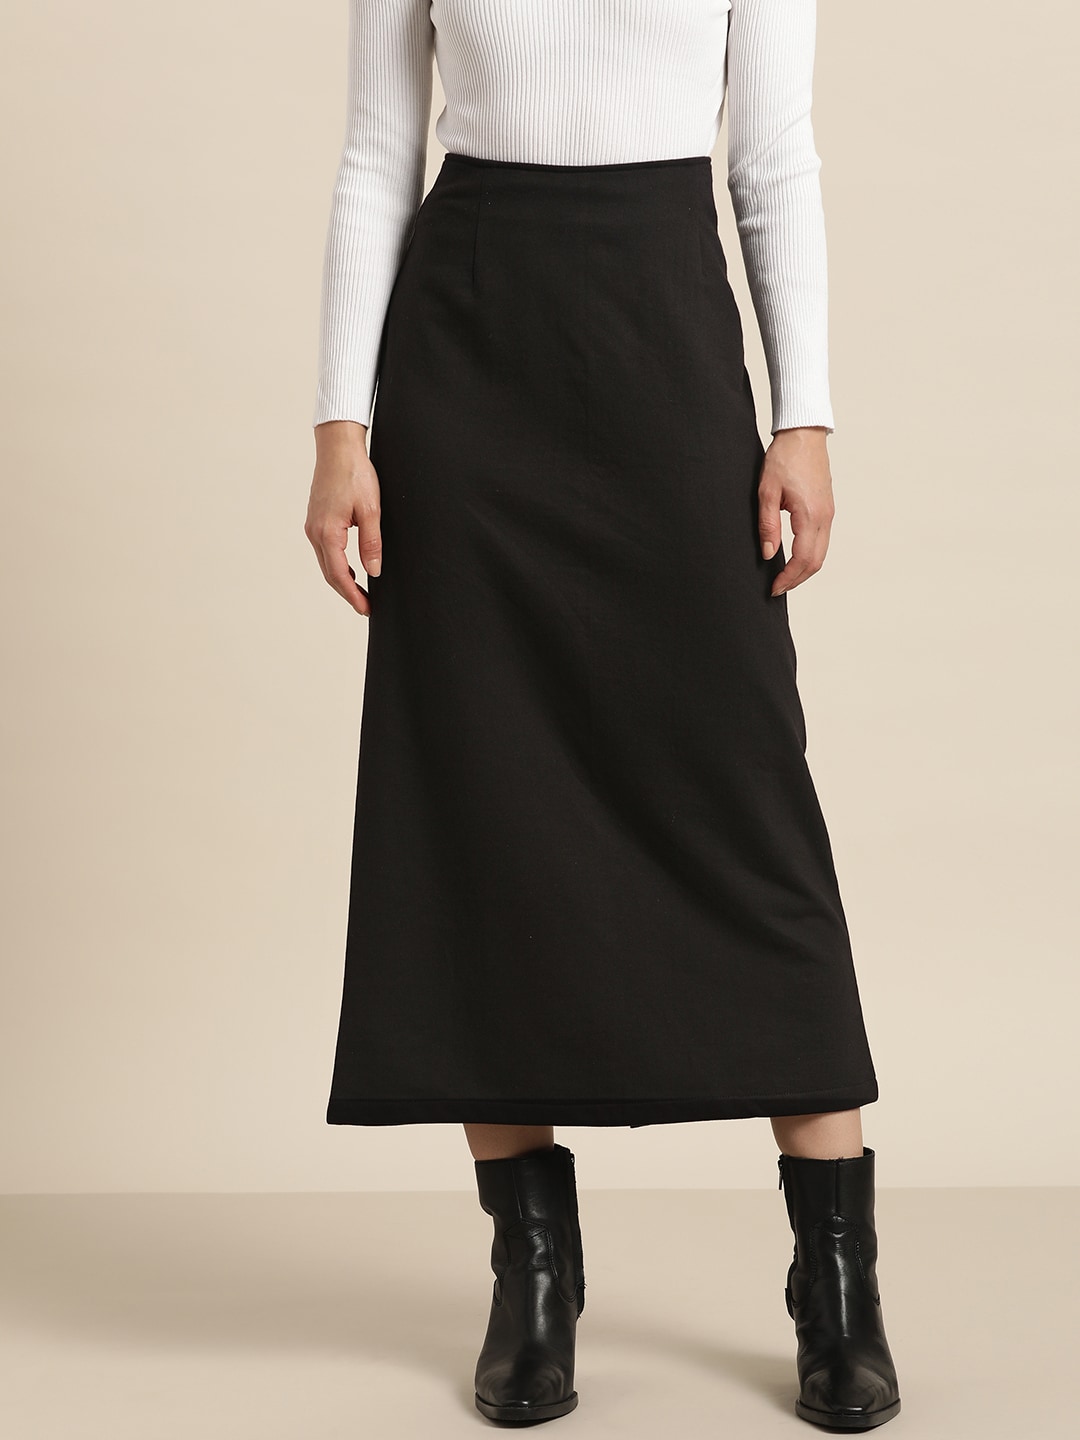 Qurvii Women Solid Black Fleece Midi A-Line Skirt with Back Slit Price in India